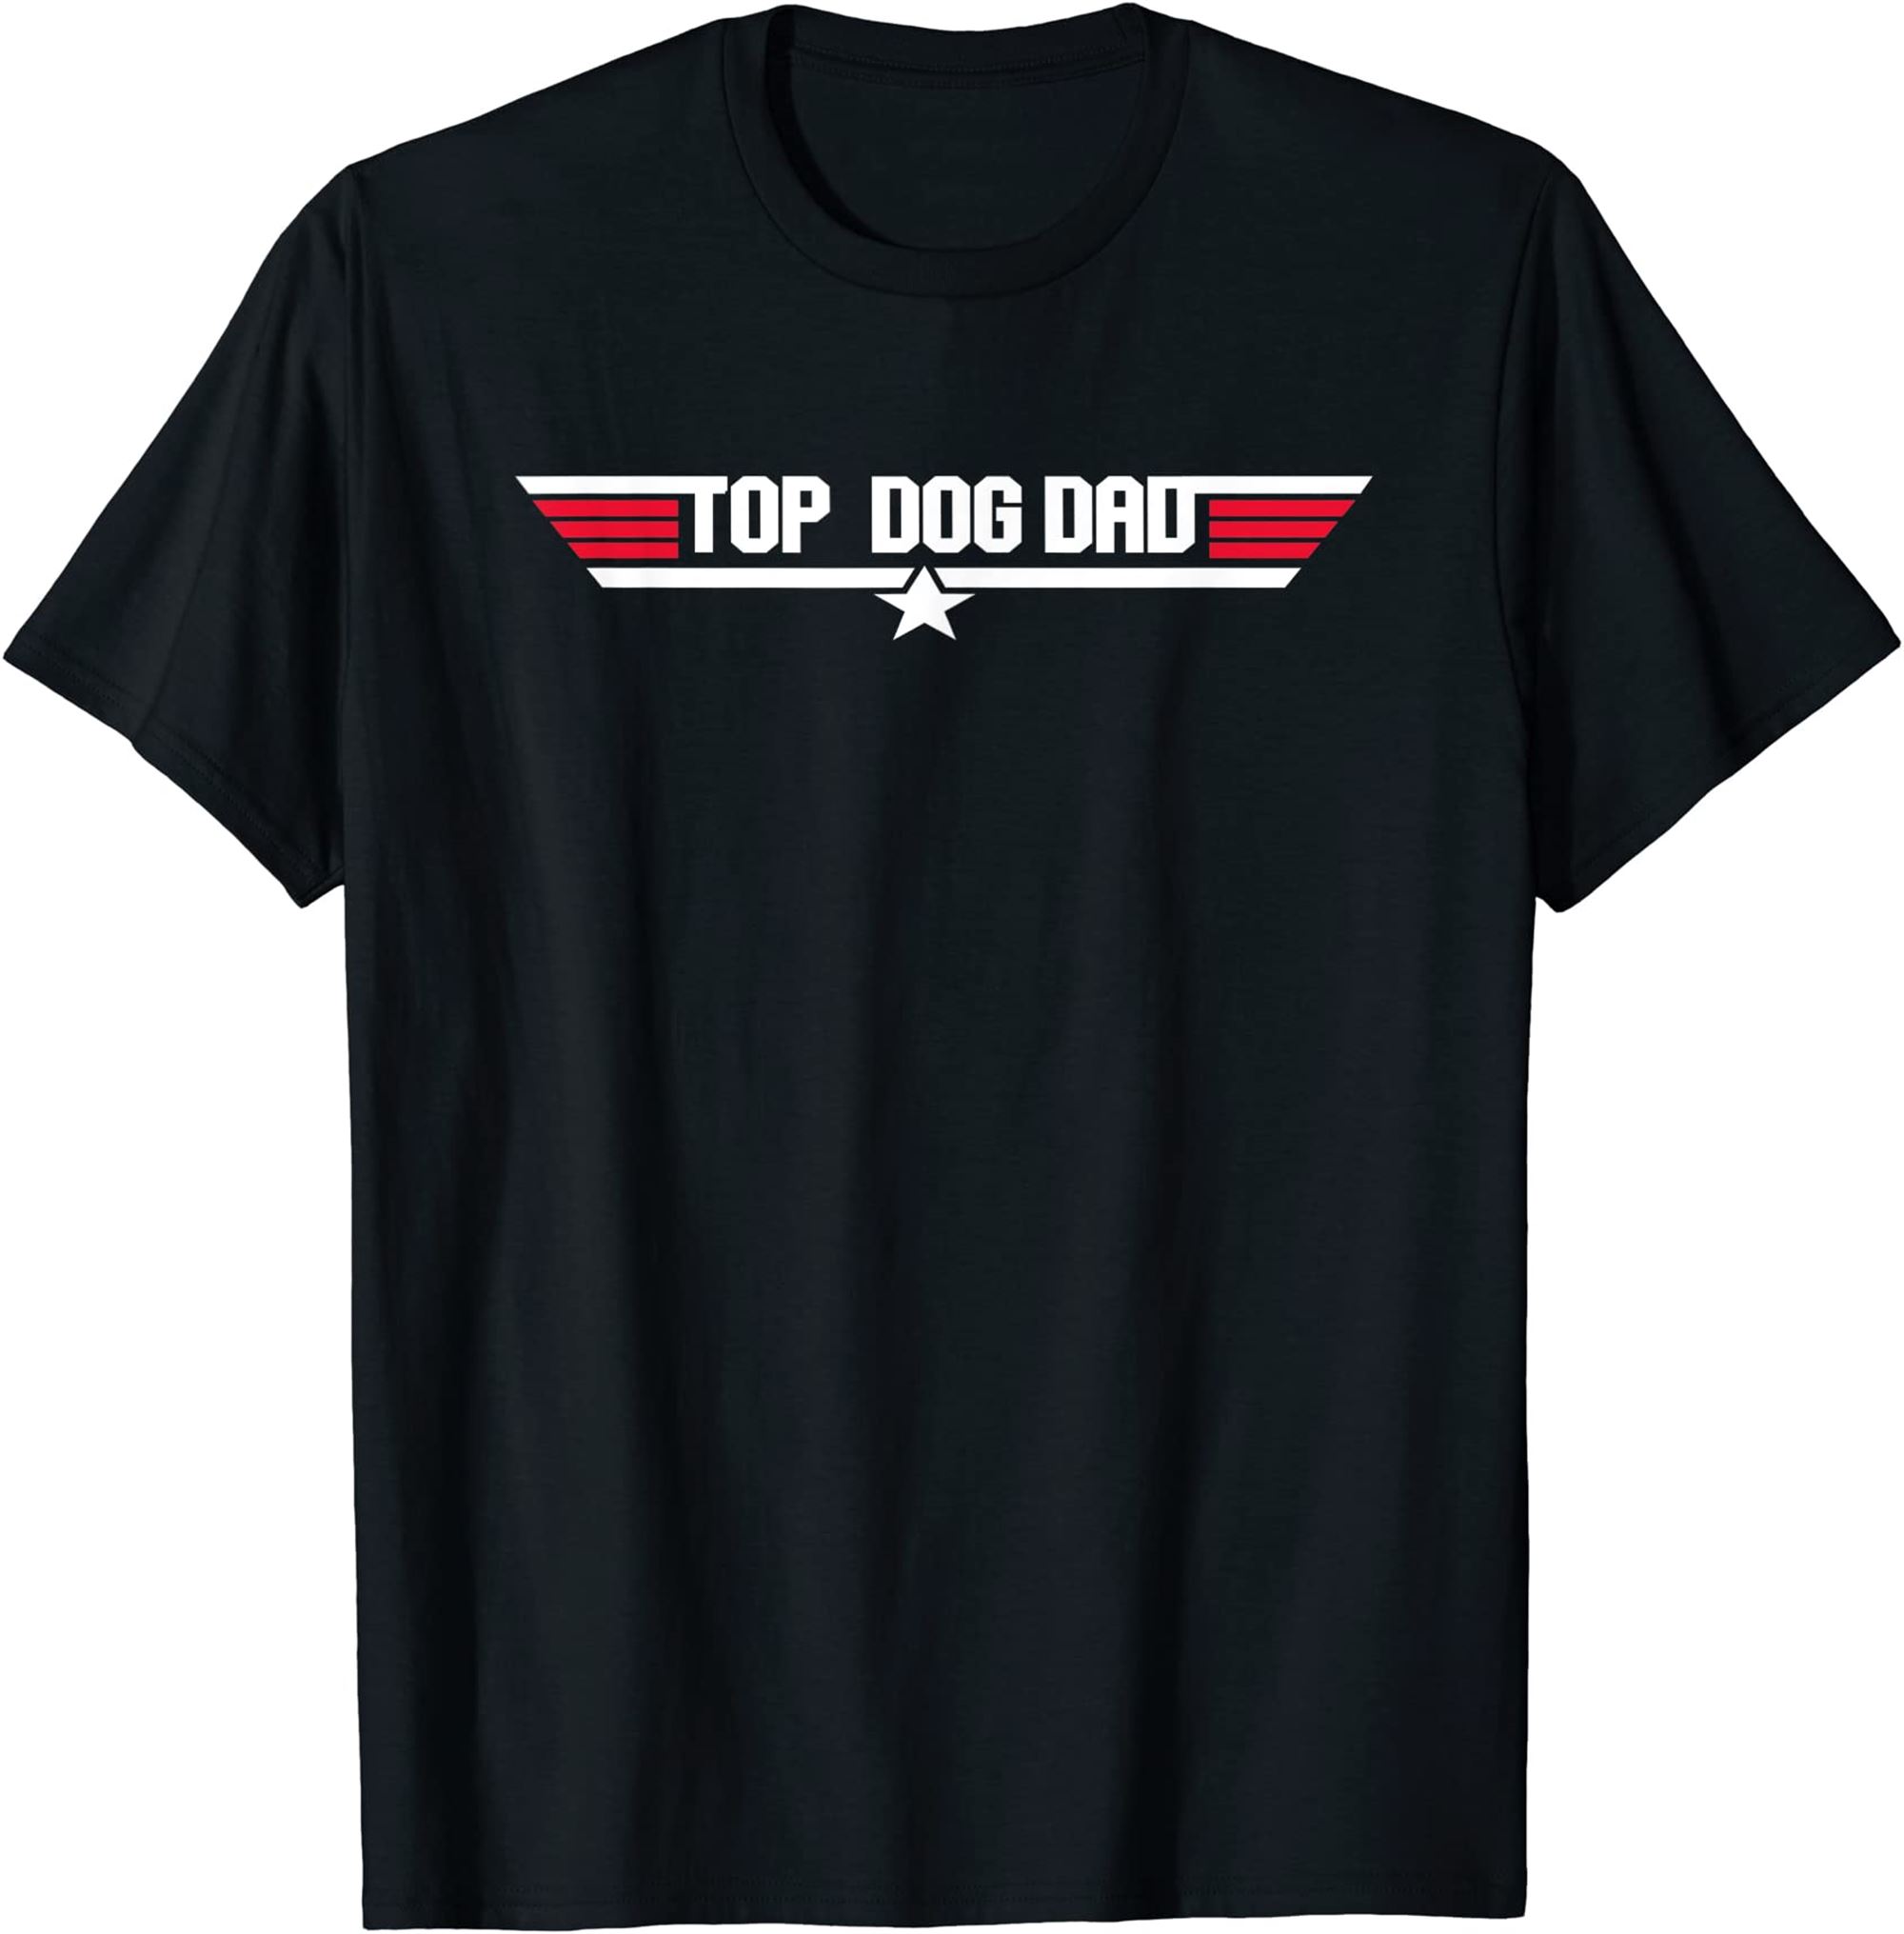 Top Dog Dad Funny Dog Father 80s Fathers Day Gift T-shirt Full Size Up To 5xl